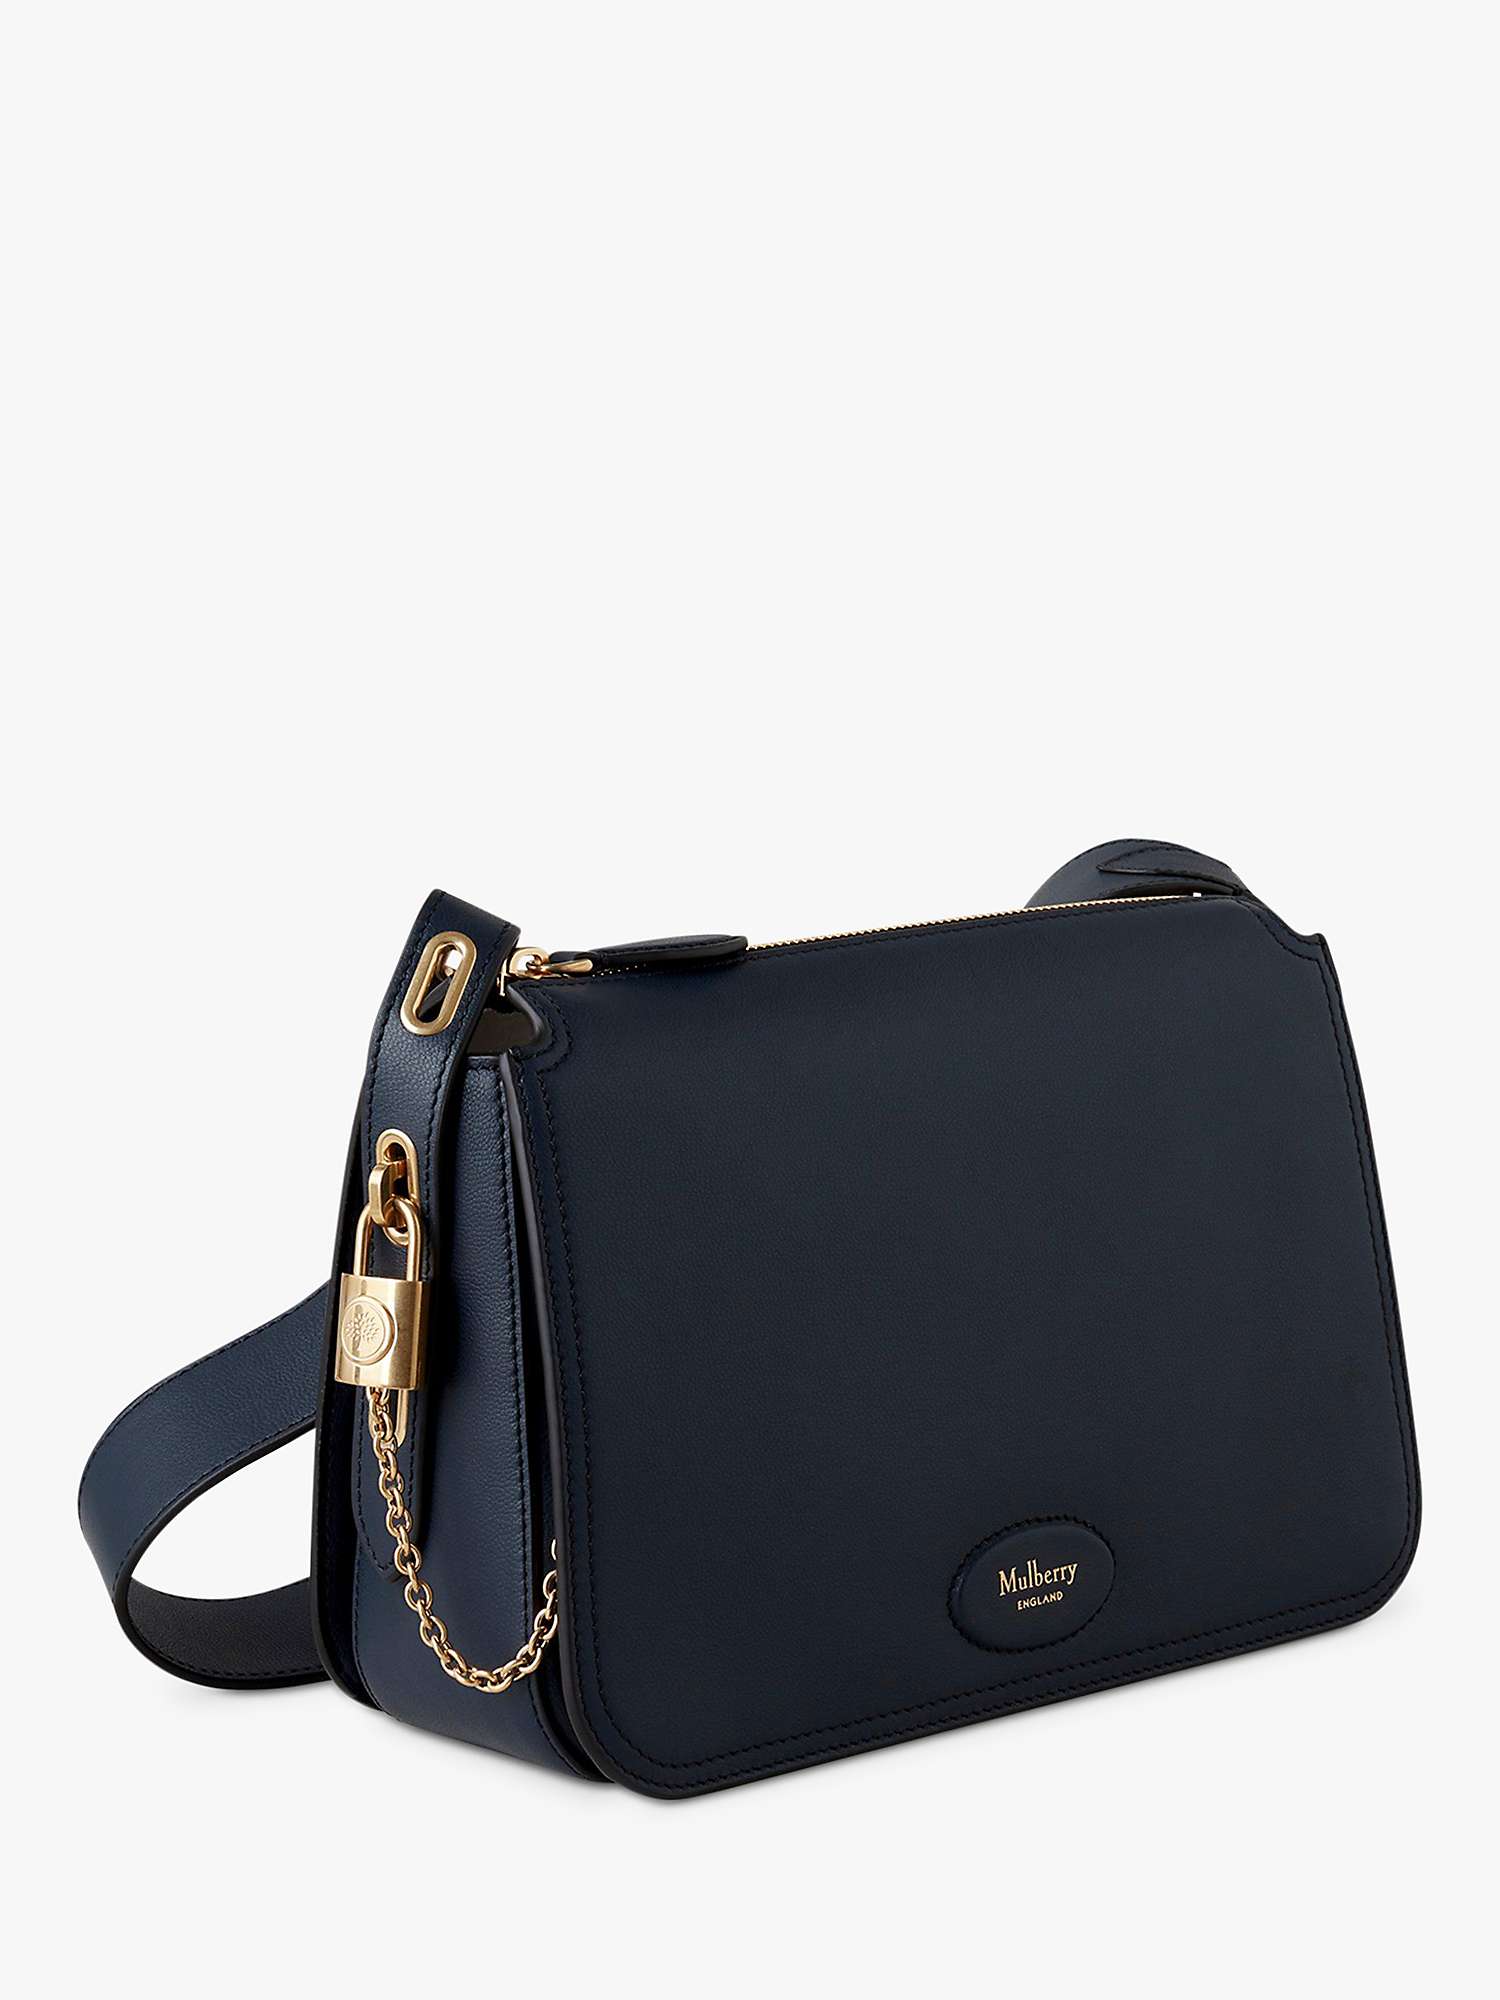 Buy Mulberry Billie Micro Classic Grain Leather Cross Body Bag Online at johnlewis.com